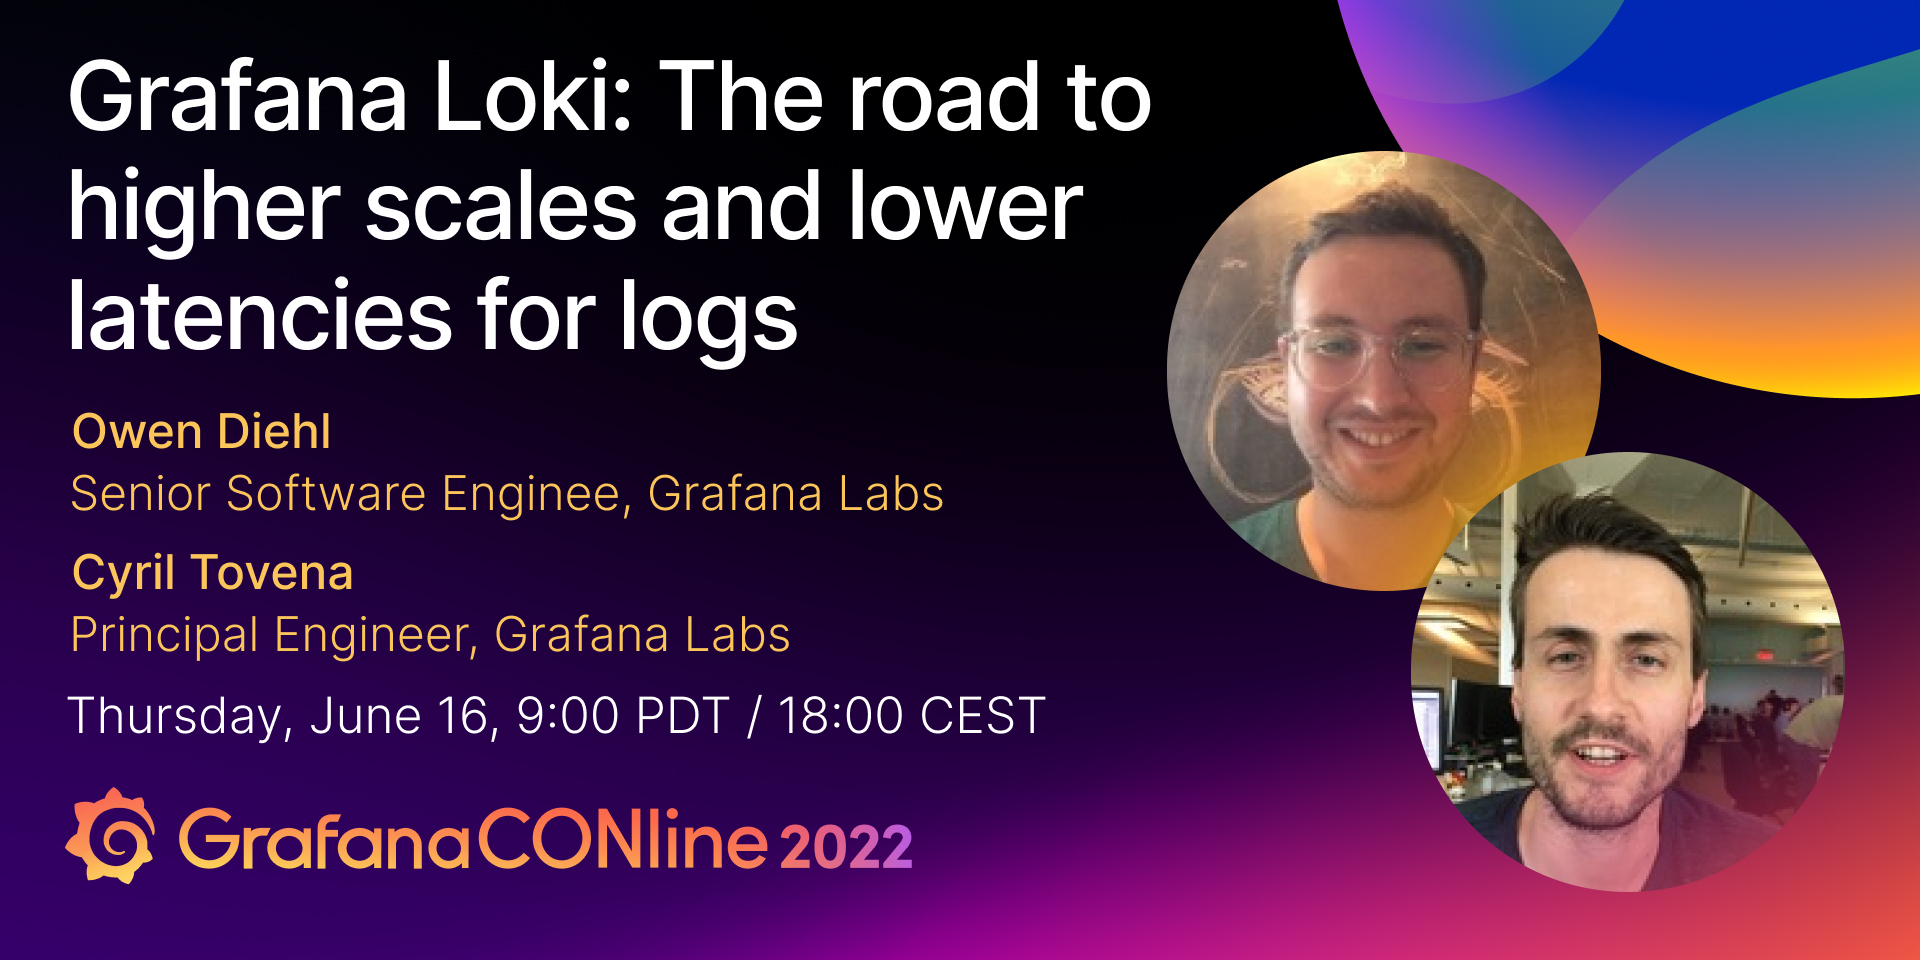 Grafana Loki: The road to higher scales and lower latencies for logs